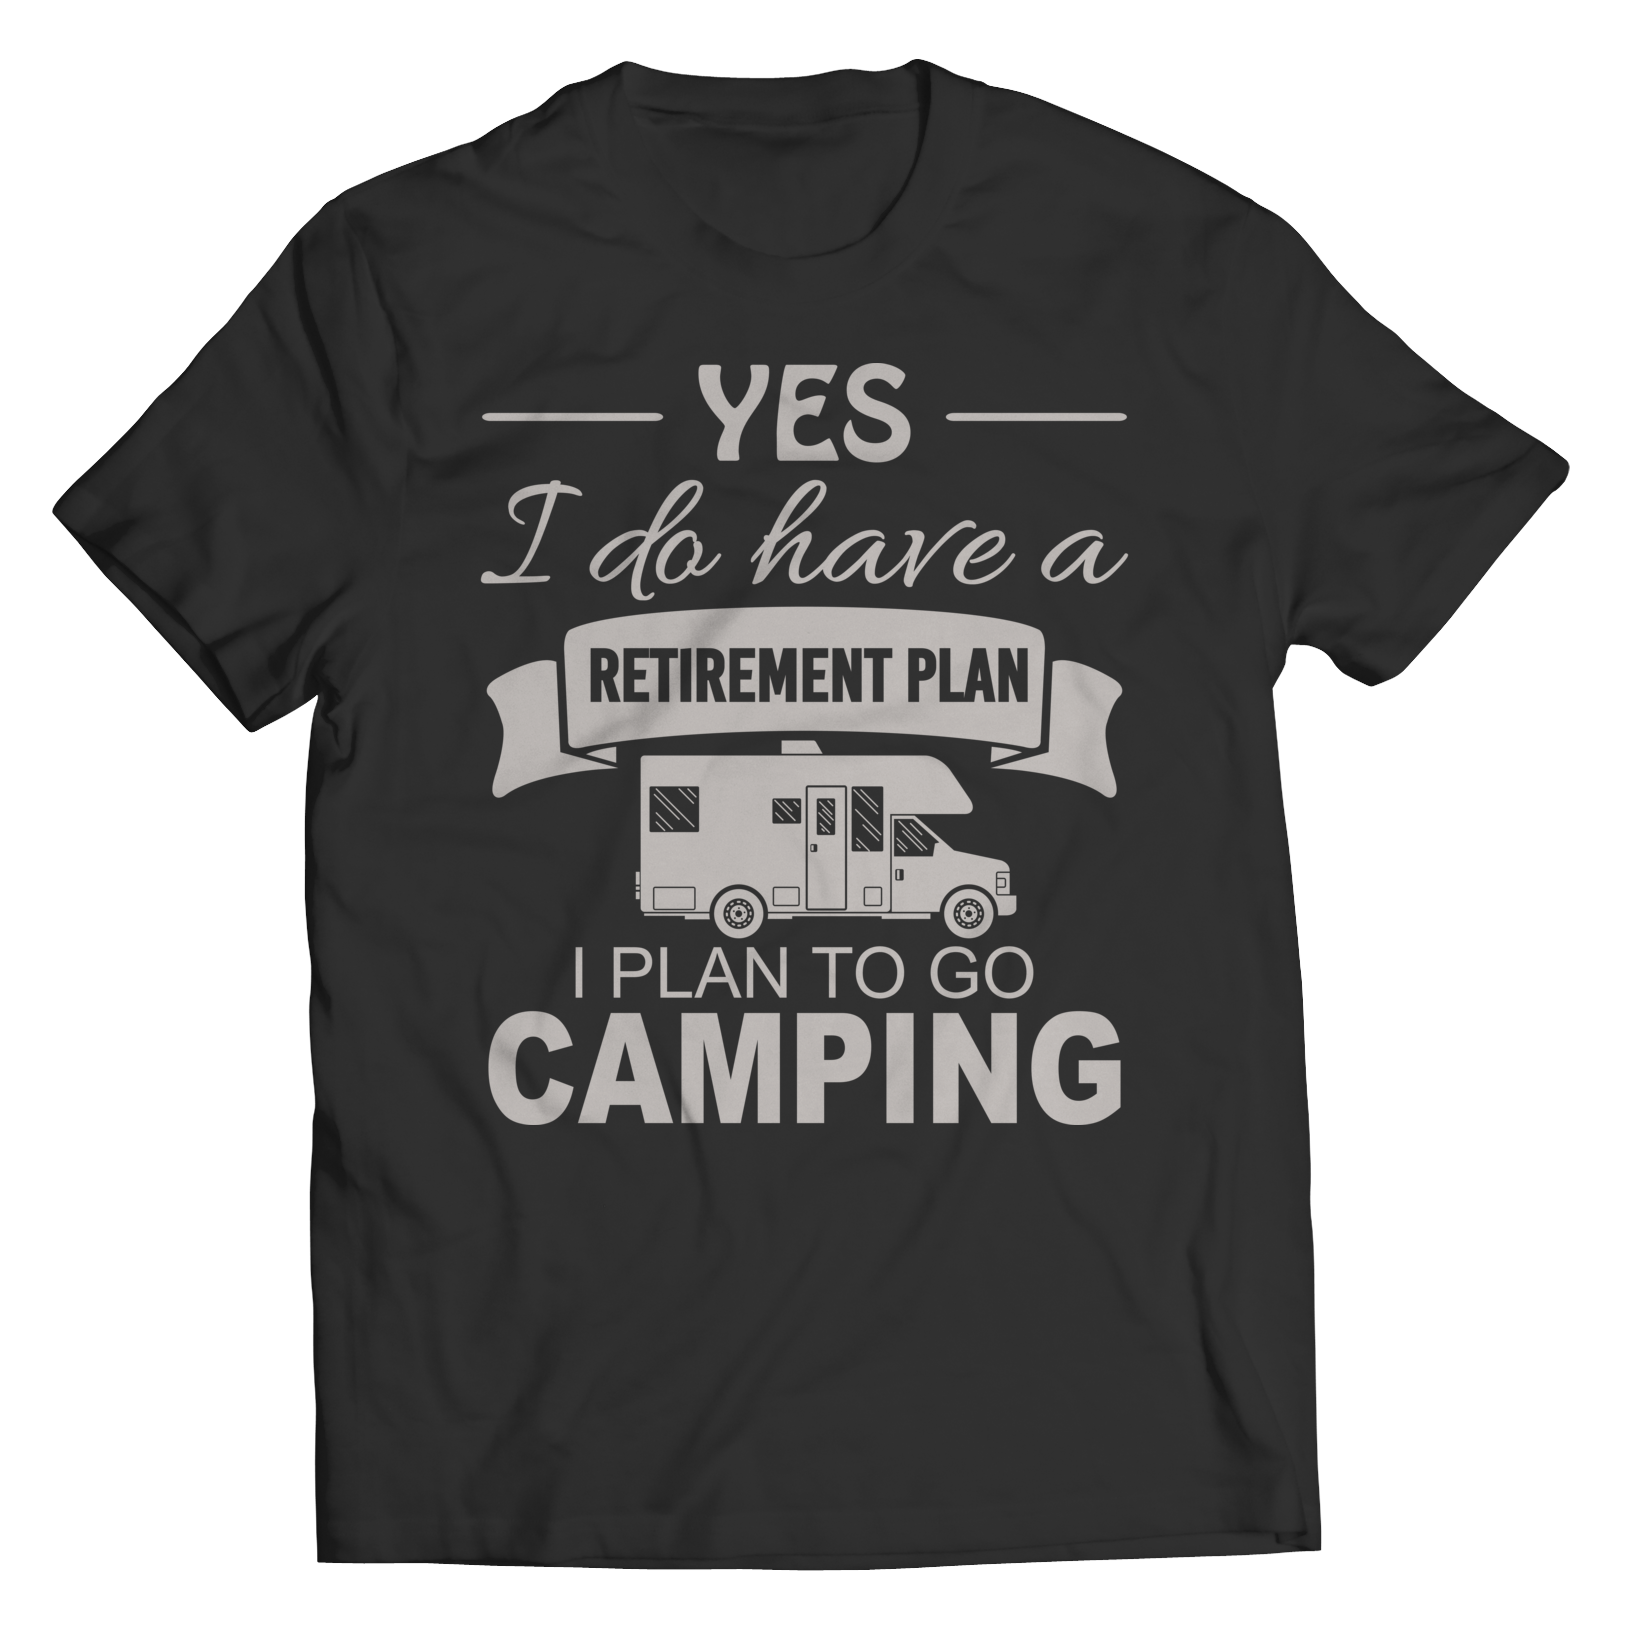 Limited Edition - Camping Retirement Plan Shirt